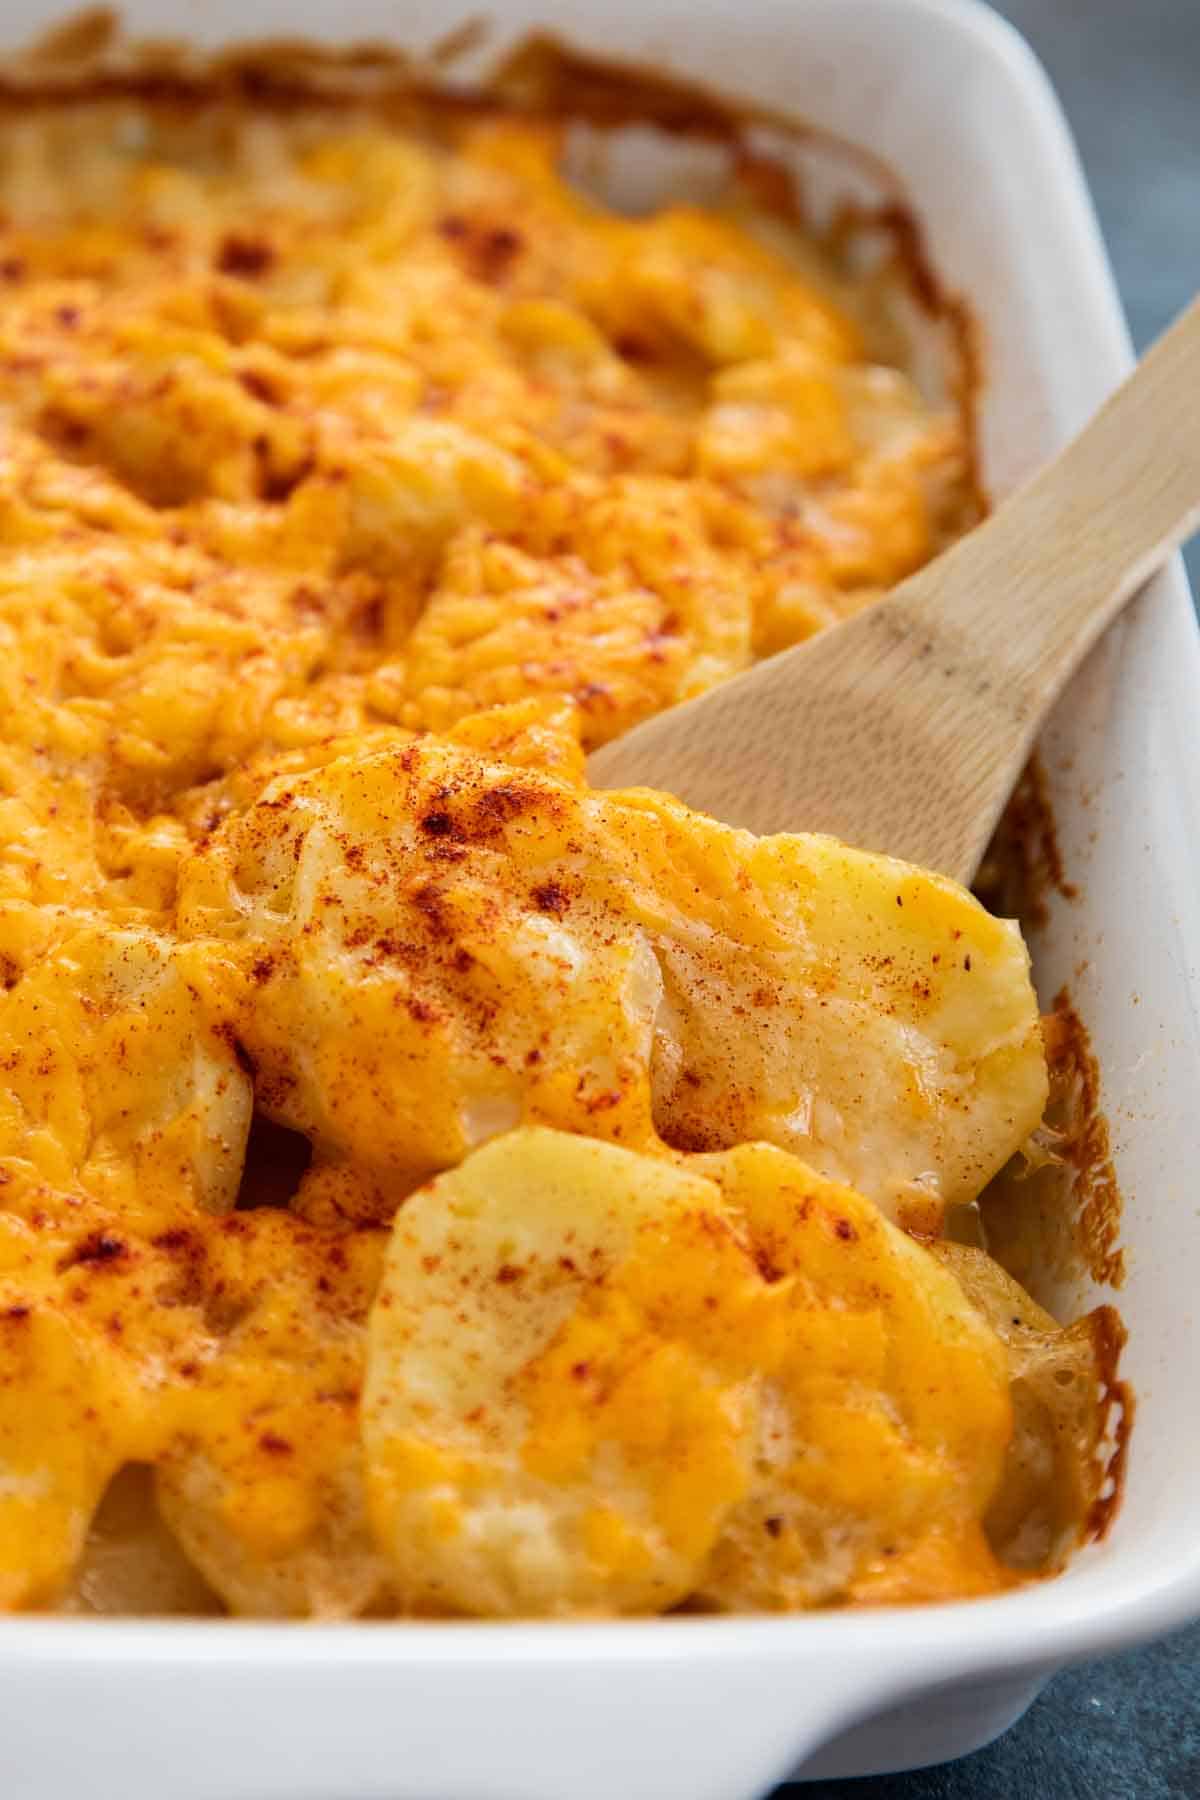 wooden spoon scooping out scalloped potatoes from a baking dish